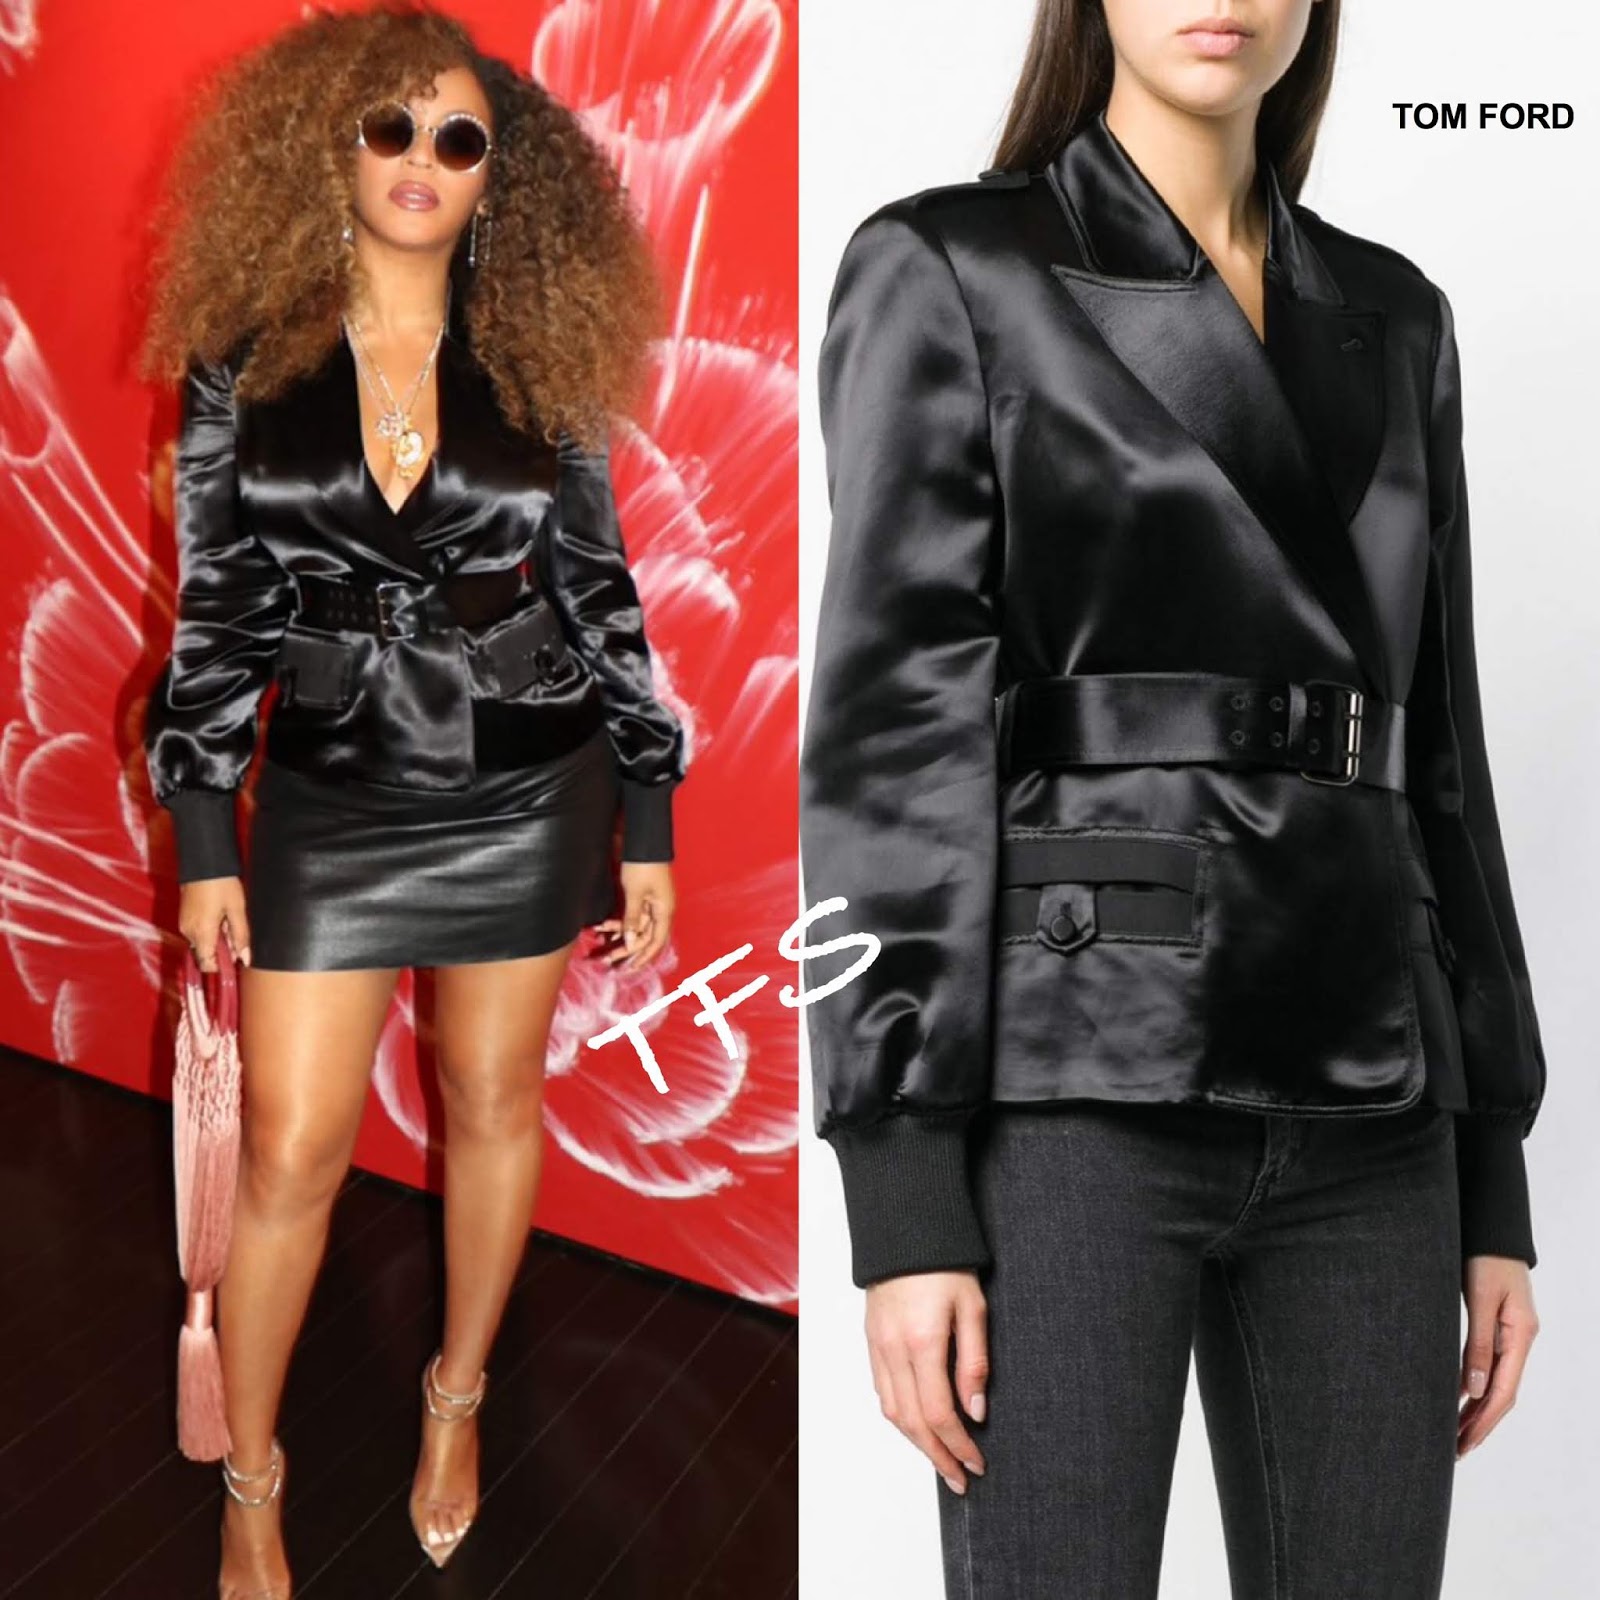 Instagram Style: Beyonce in Tom Ford at the Jay-Z 'B Sides 2' Concert